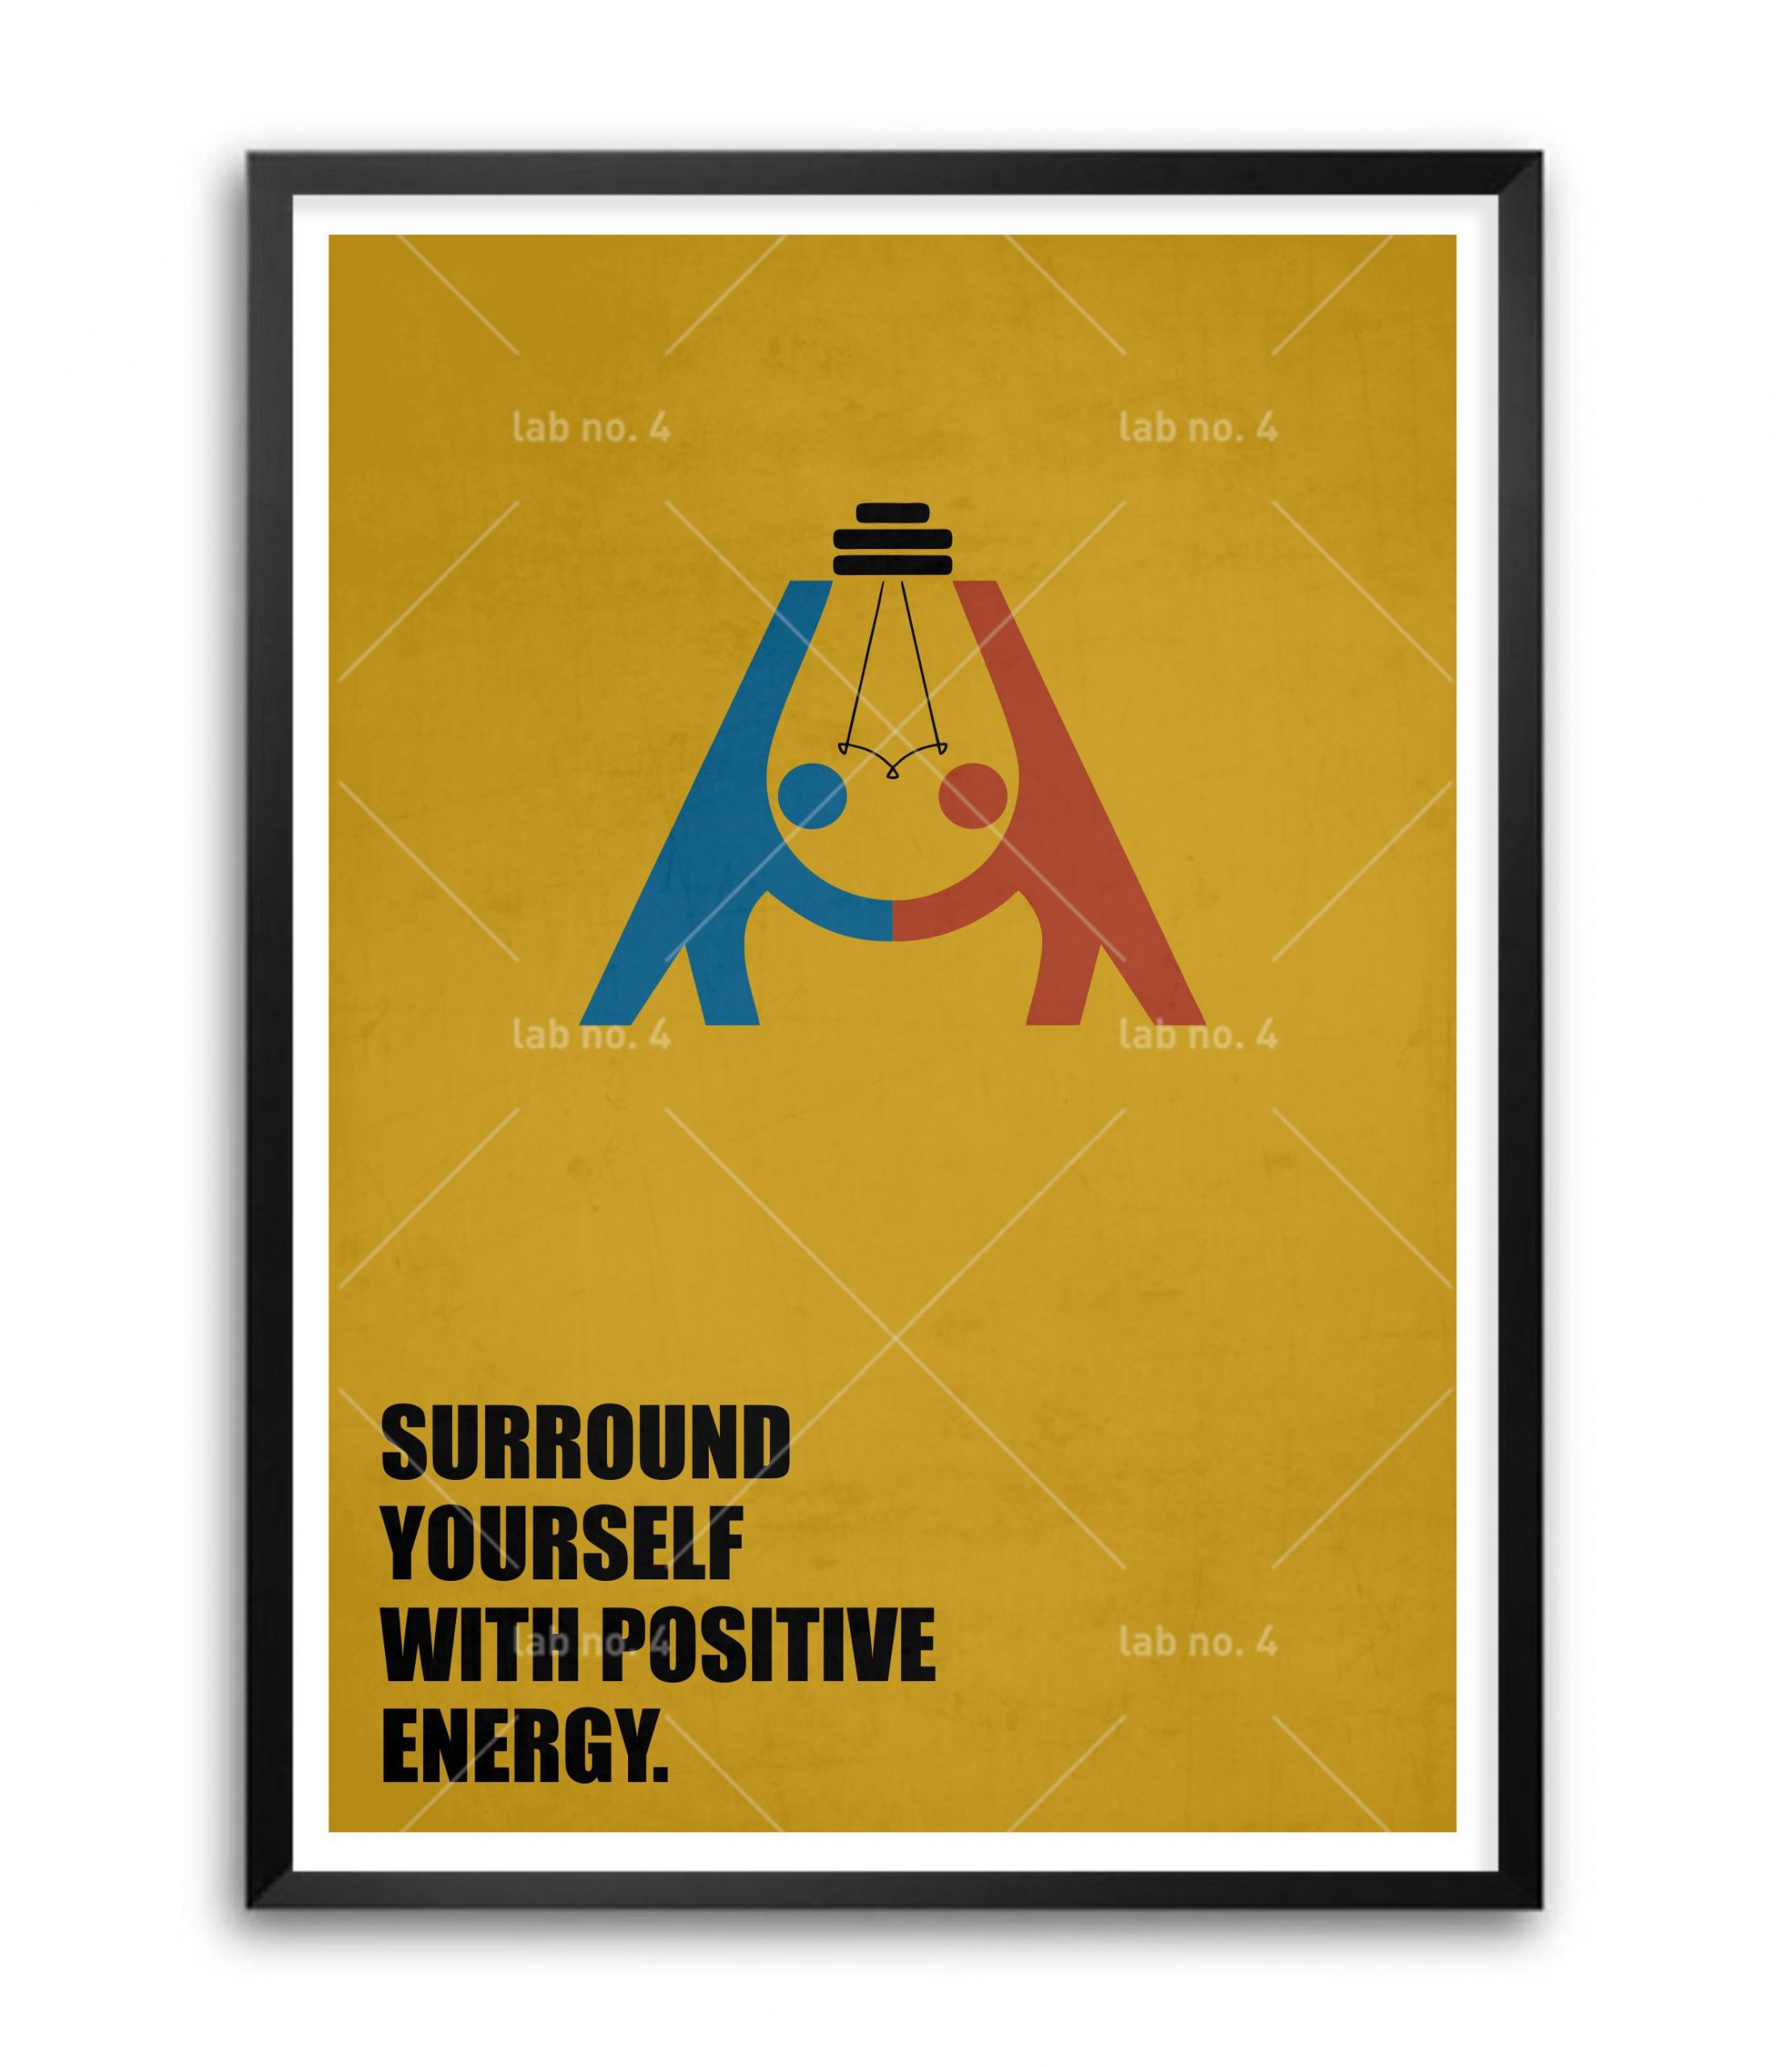 Surround Yourself With Positive Energy Quotes
 LabNo4 Surround Yourself With Positive Energy